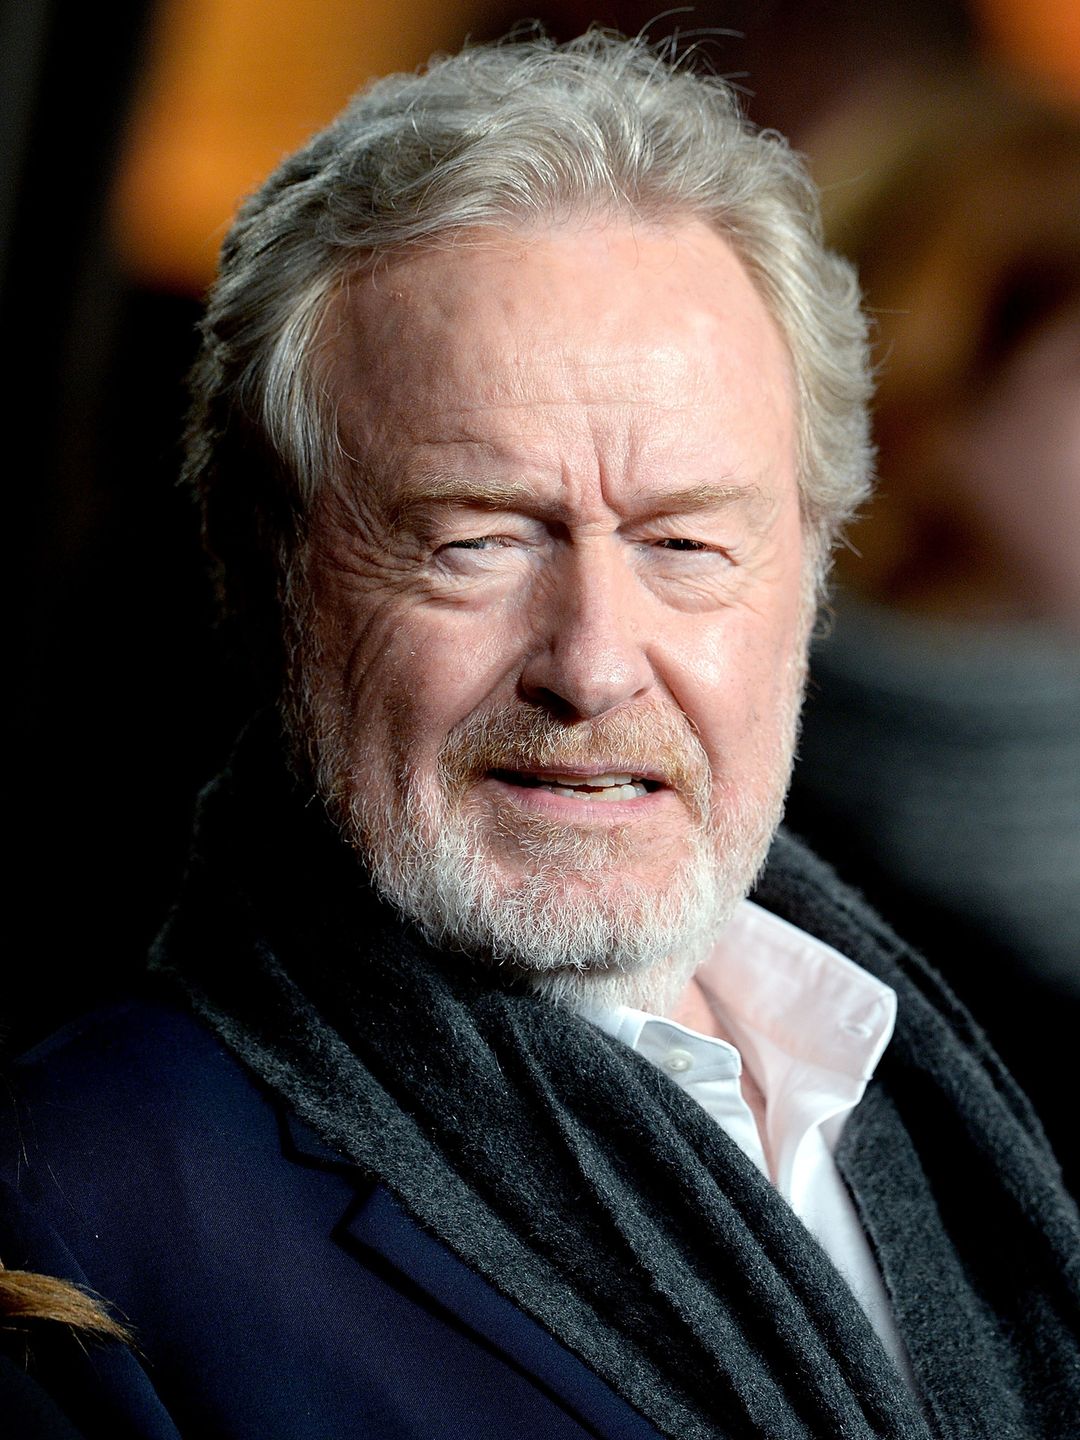 Ridley Scott who are his parents